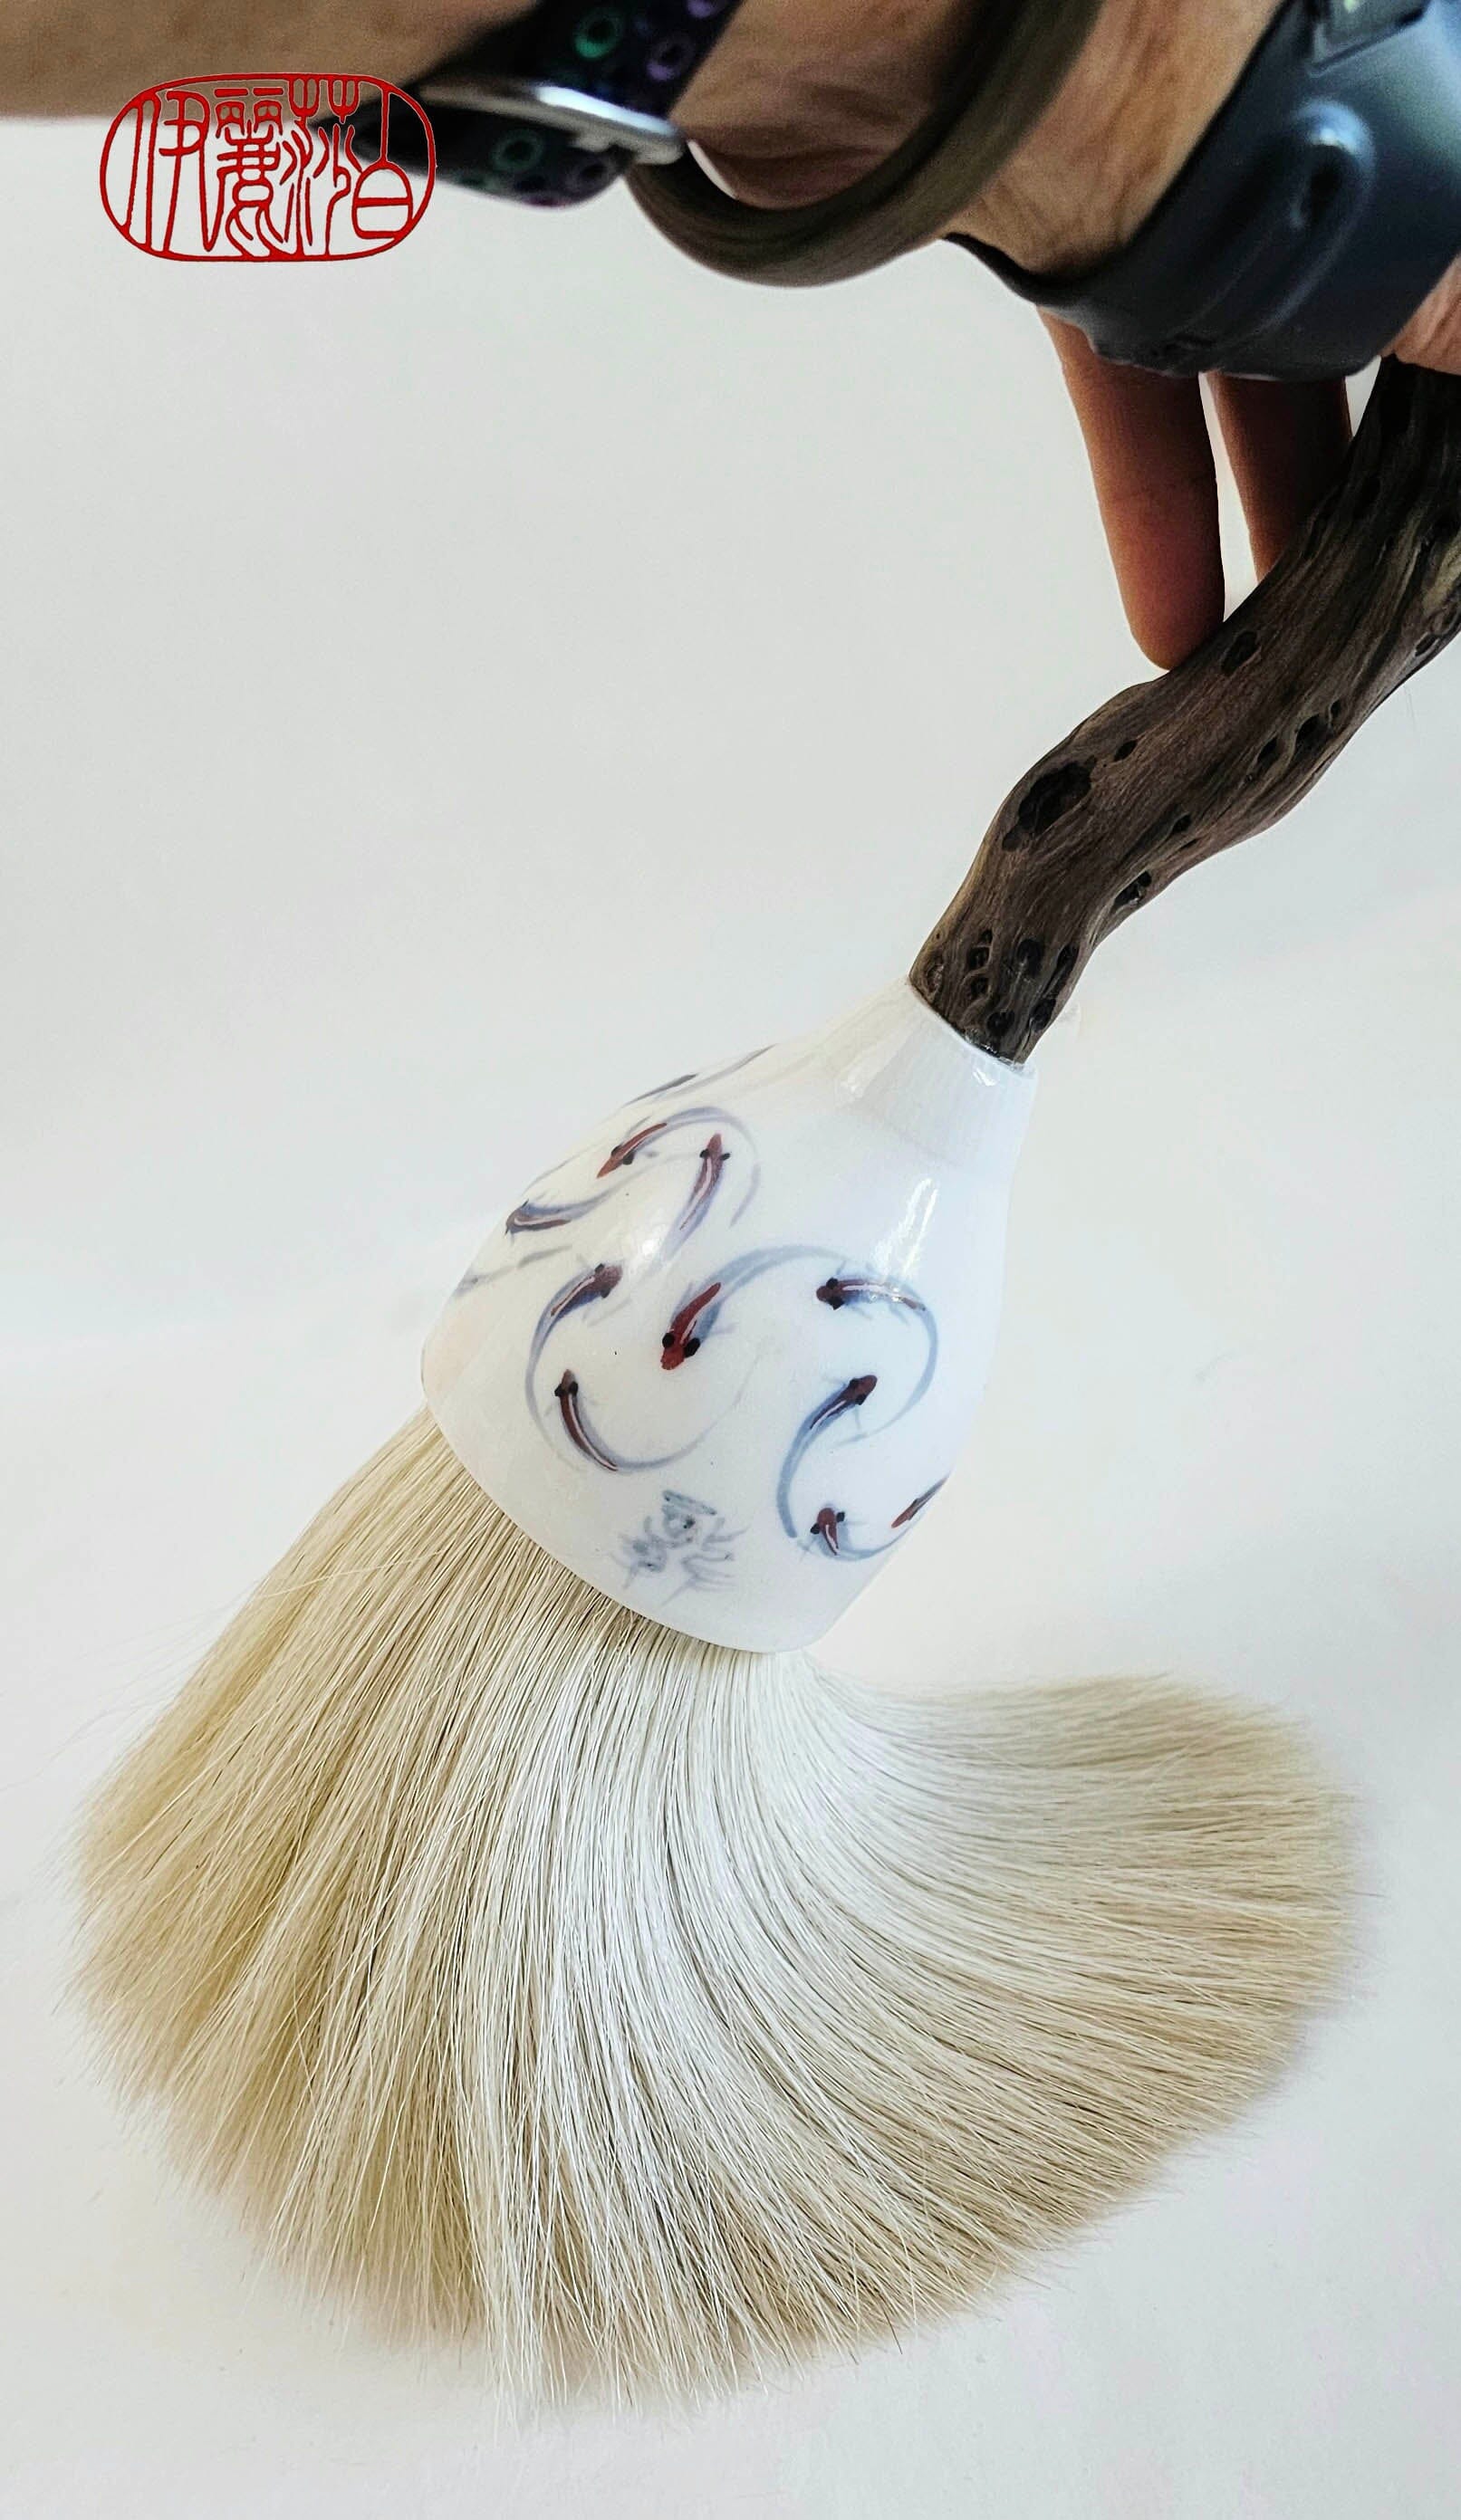 Sinful Brush Cleaner / Paintbrush Cleaning Tool 